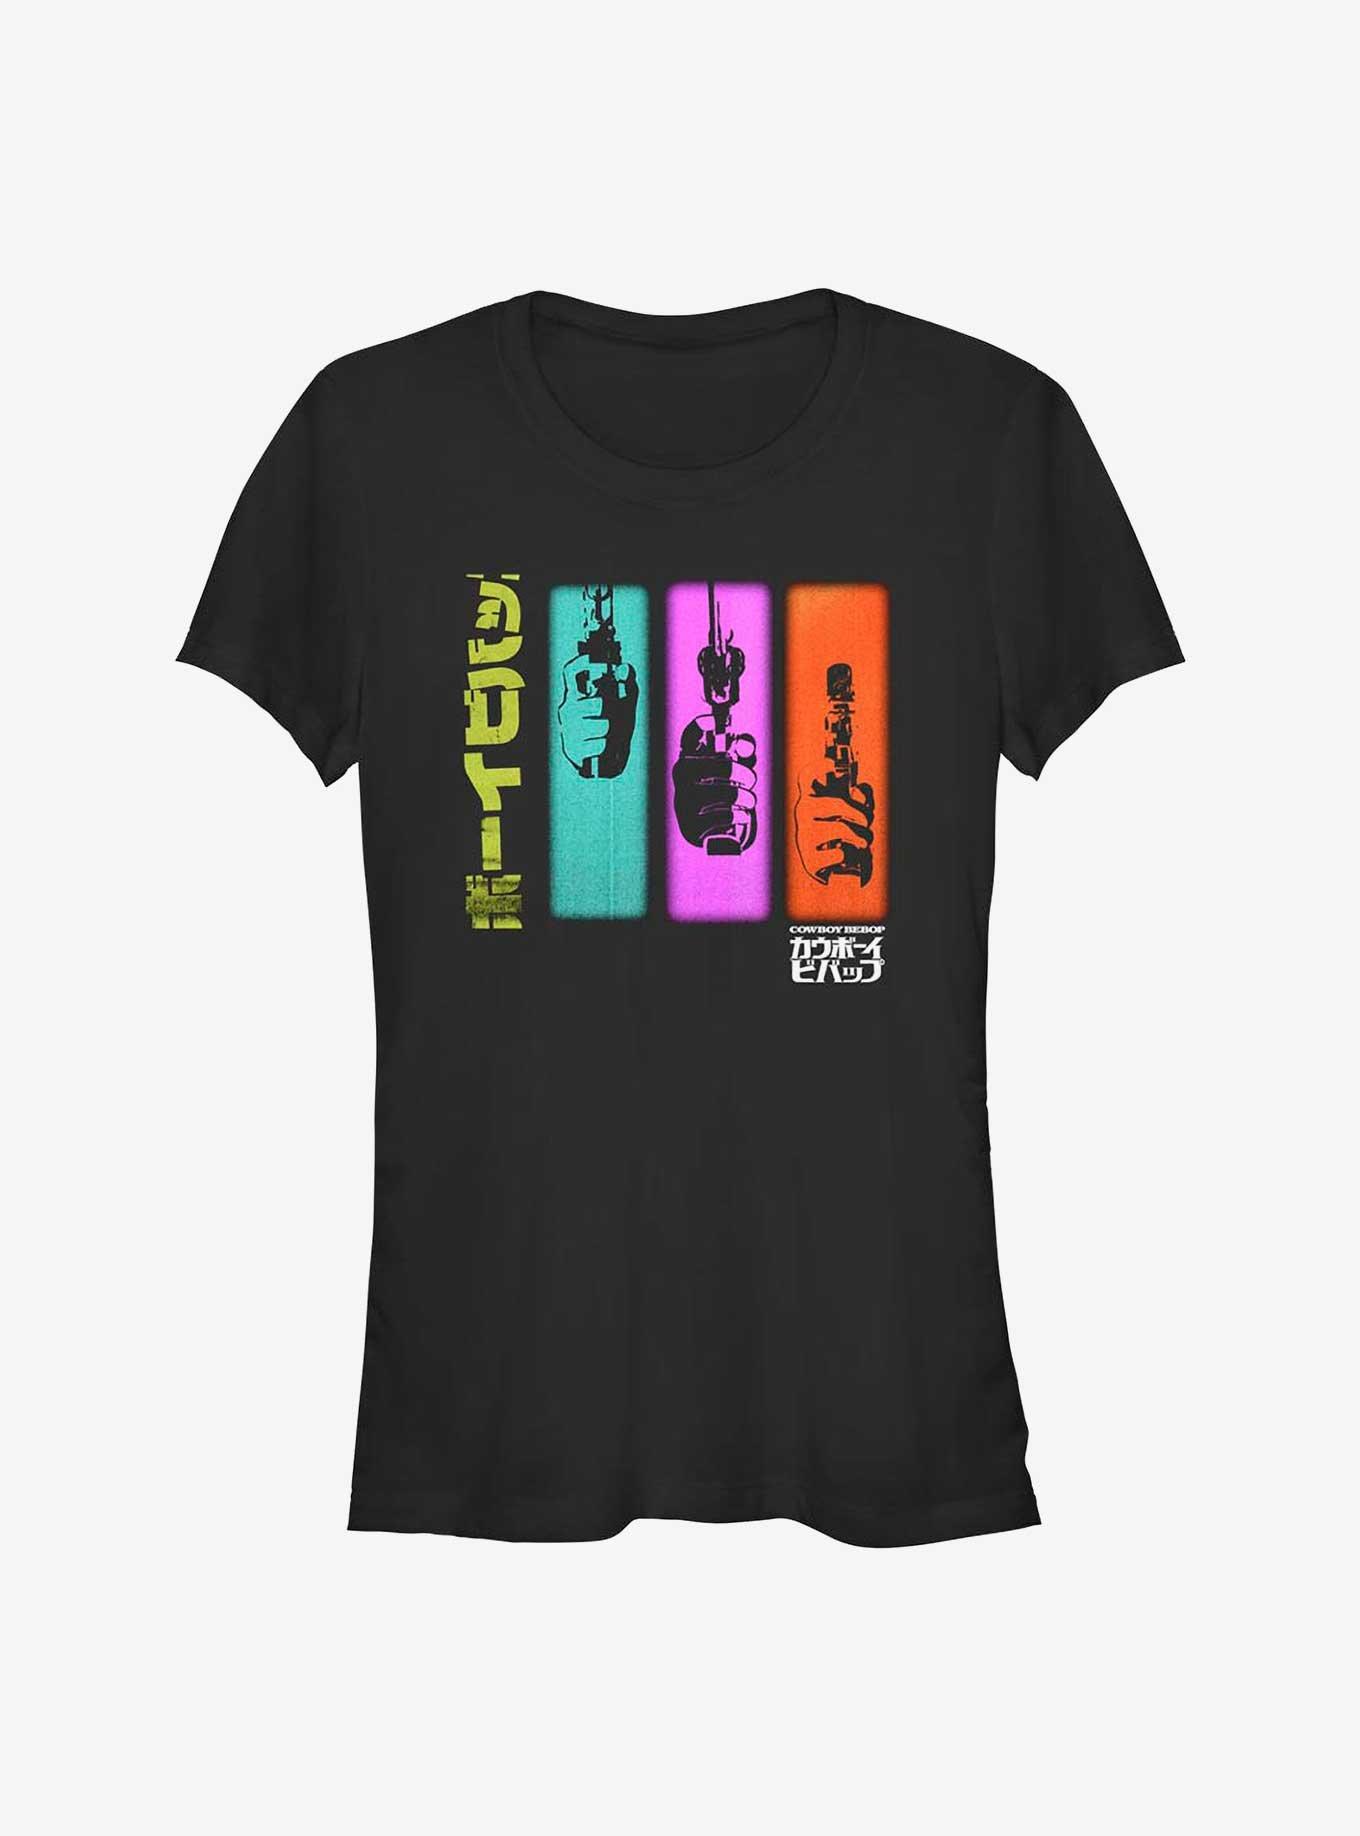 Cowboy Bebop Colorful Sequence Girl's T-Shirt